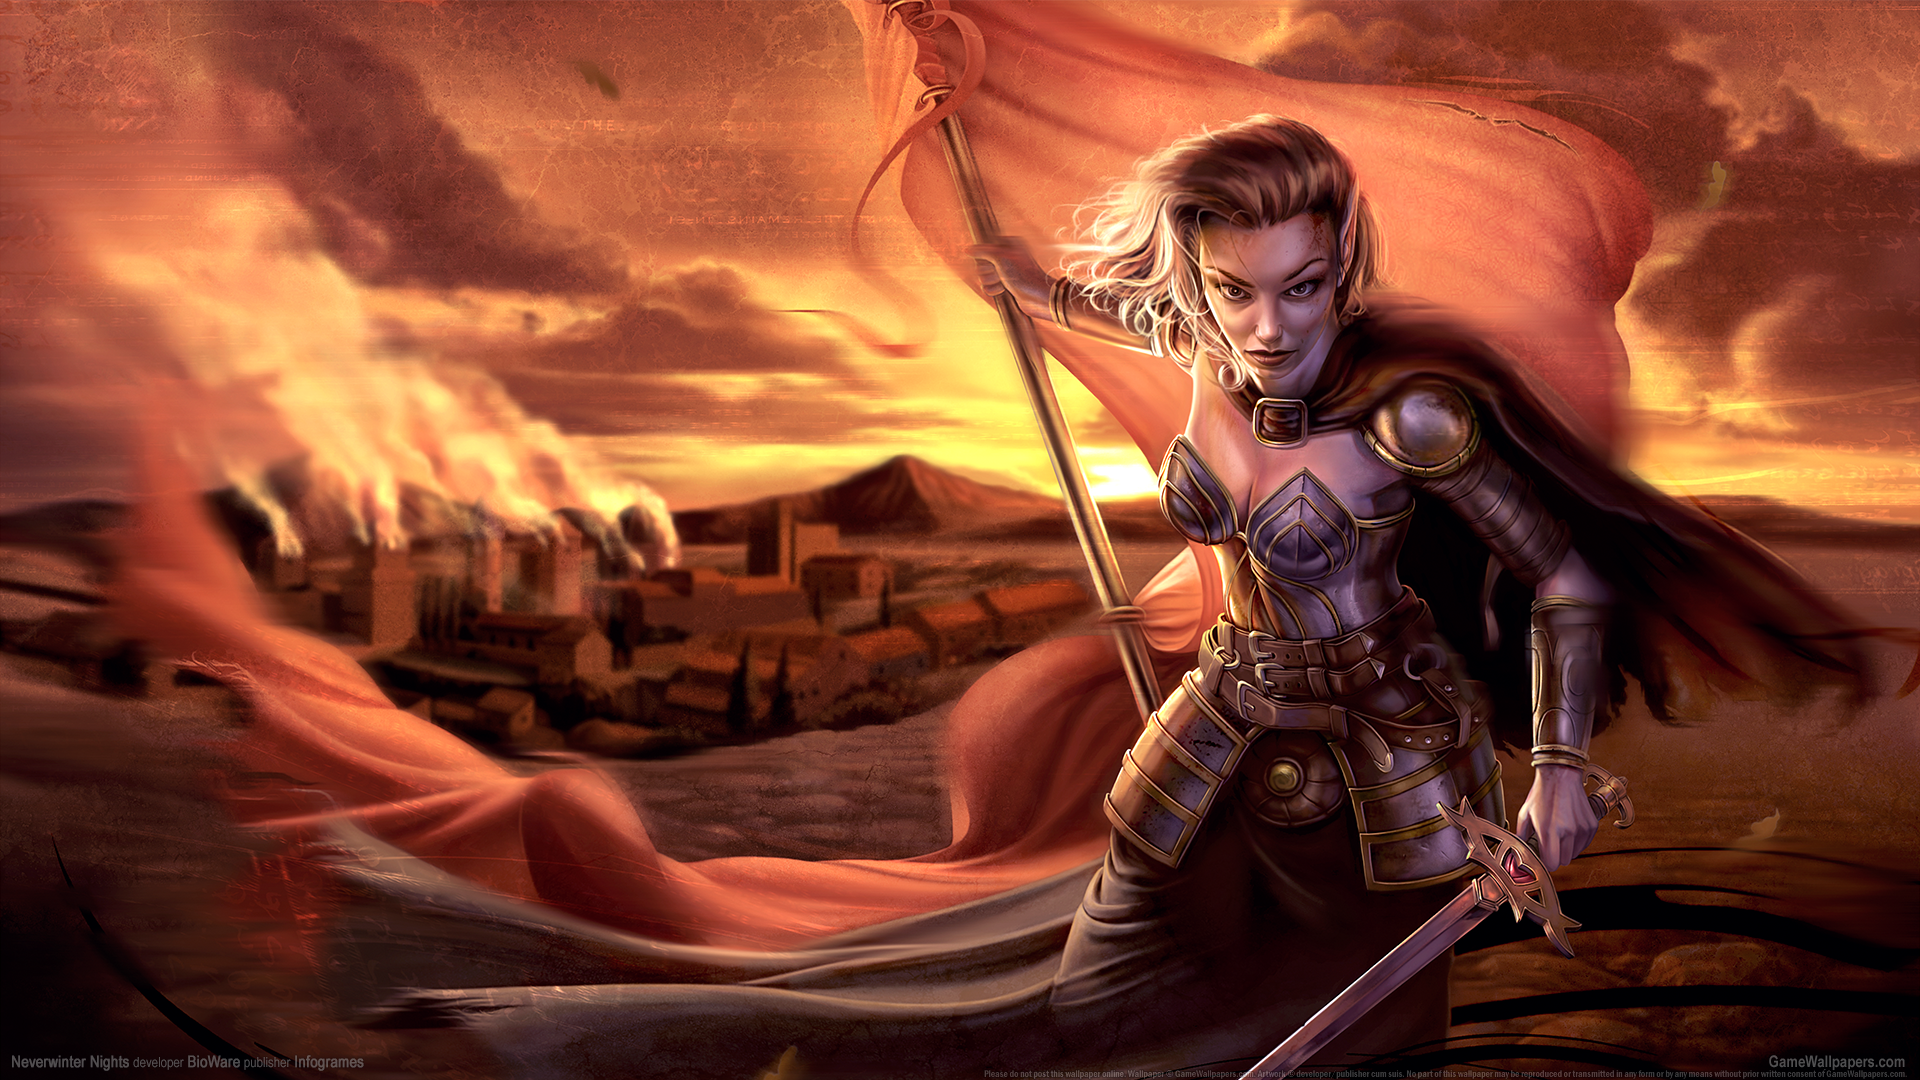 Neverwinter Nights 1920x1080 wallpaper or background 11